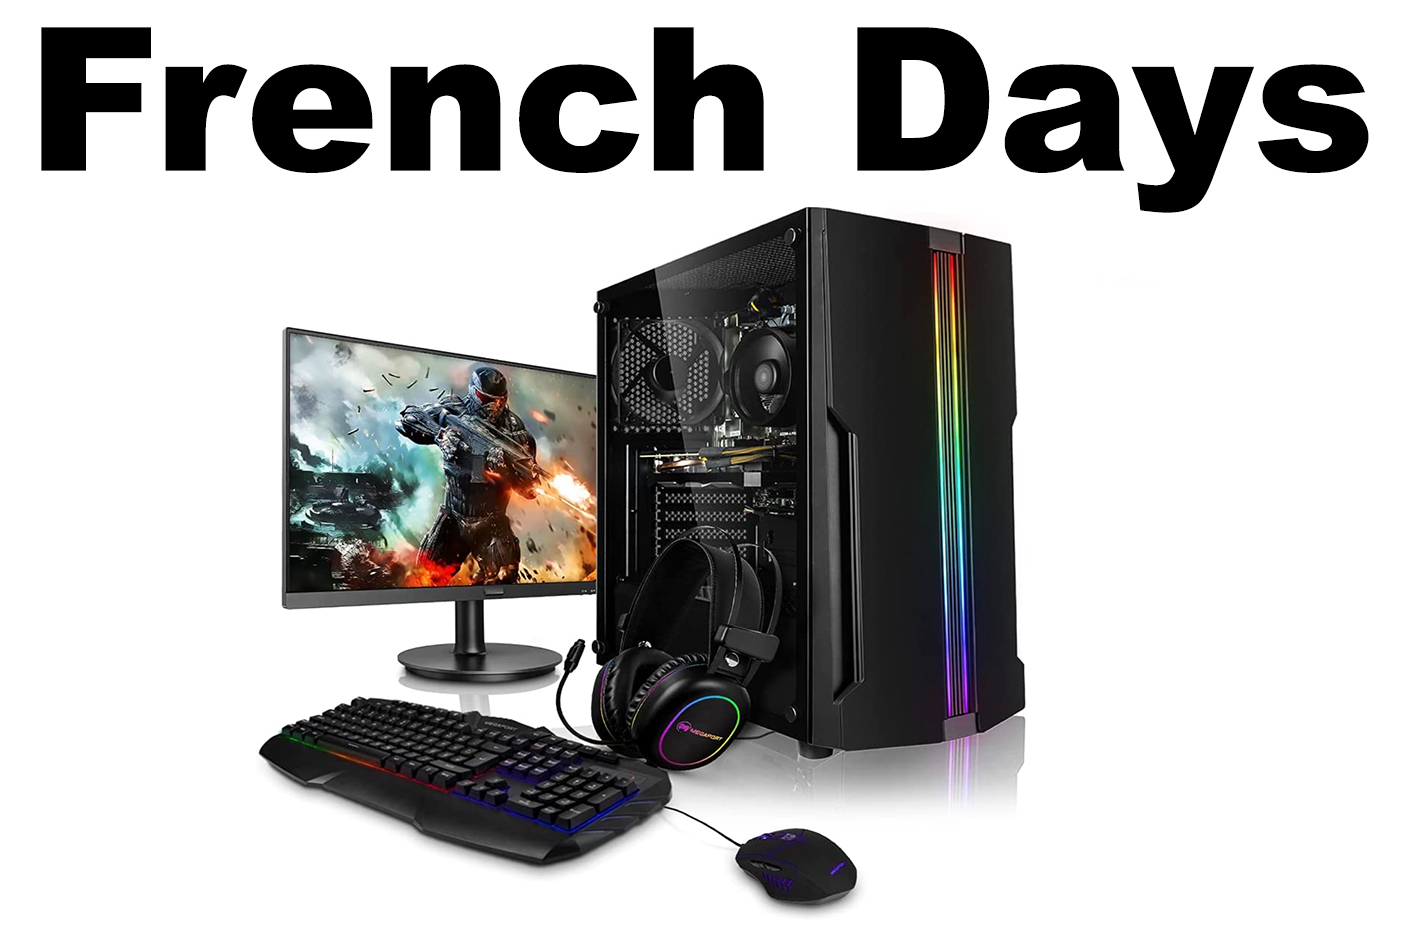 French Days Megaport PC Gamer Fixe